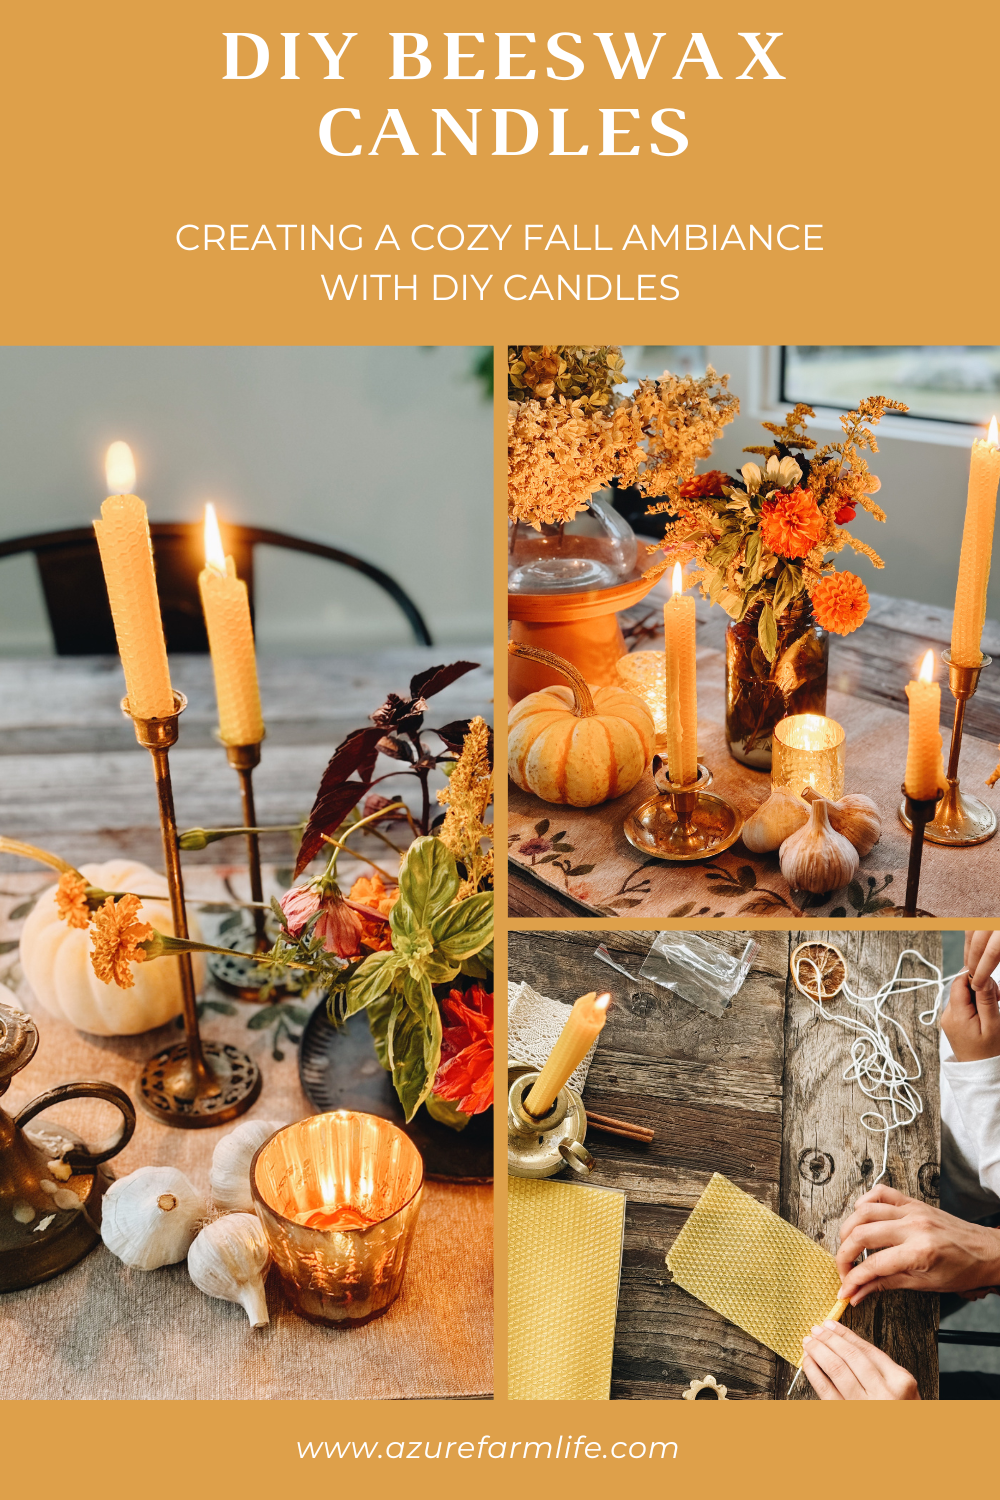 How to Make Fall Scented Beeswax Candles